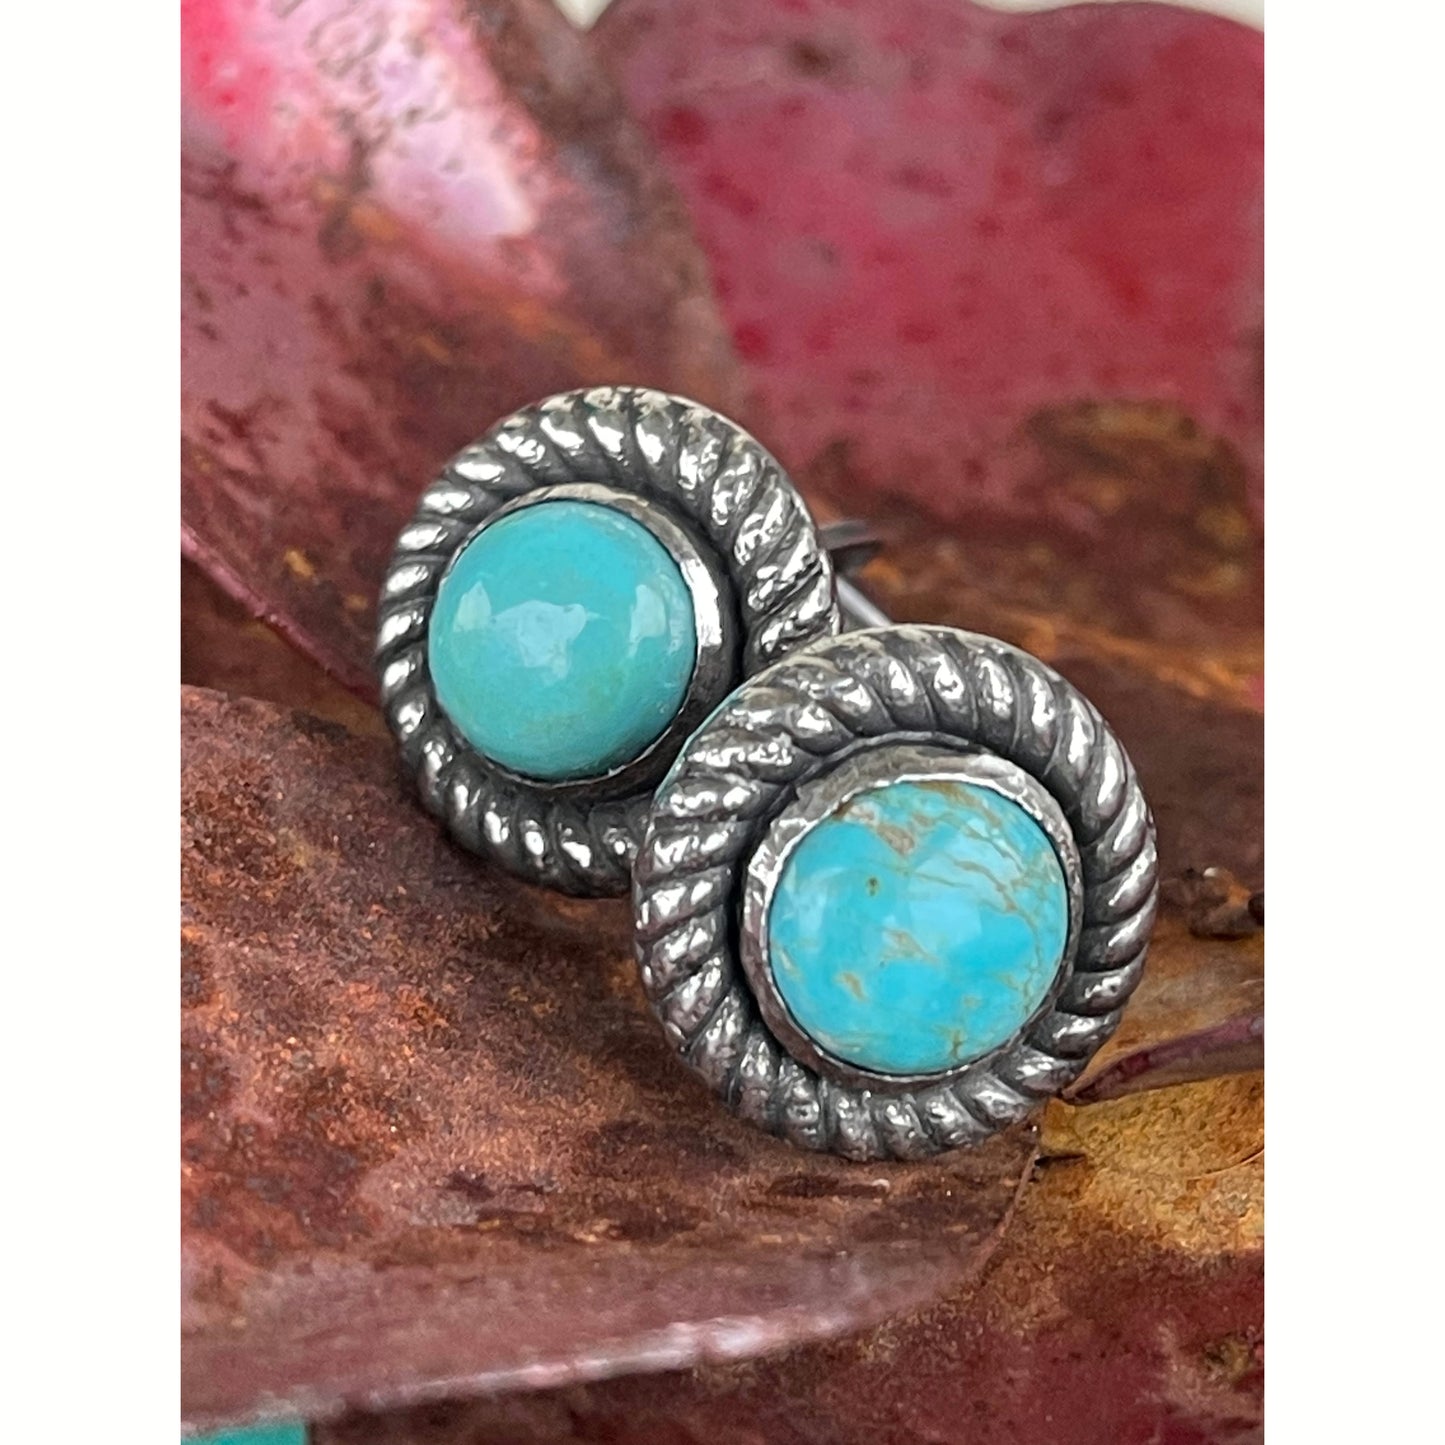 Custom Sterling silver round cufflink with an 8mm genuine Kingman Turquoise Stone finished with a roped border.